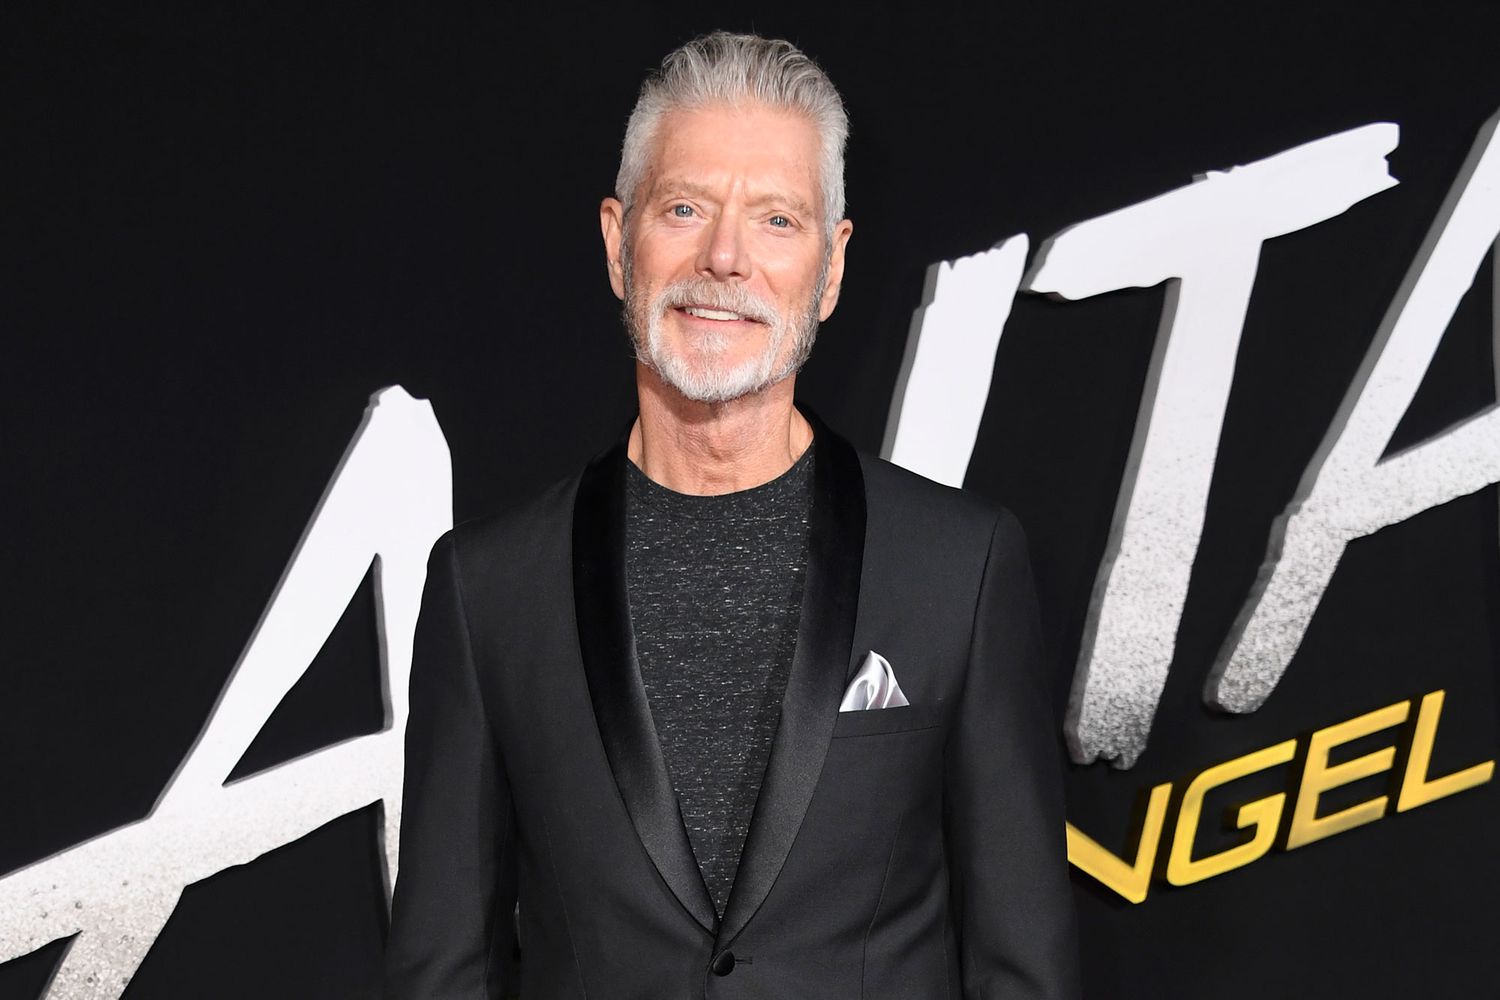 AVATAR THE WAY OF WATER Star Stephen Lang Finally Reveals How He Returns  After Being Killed Off  SPOILERS